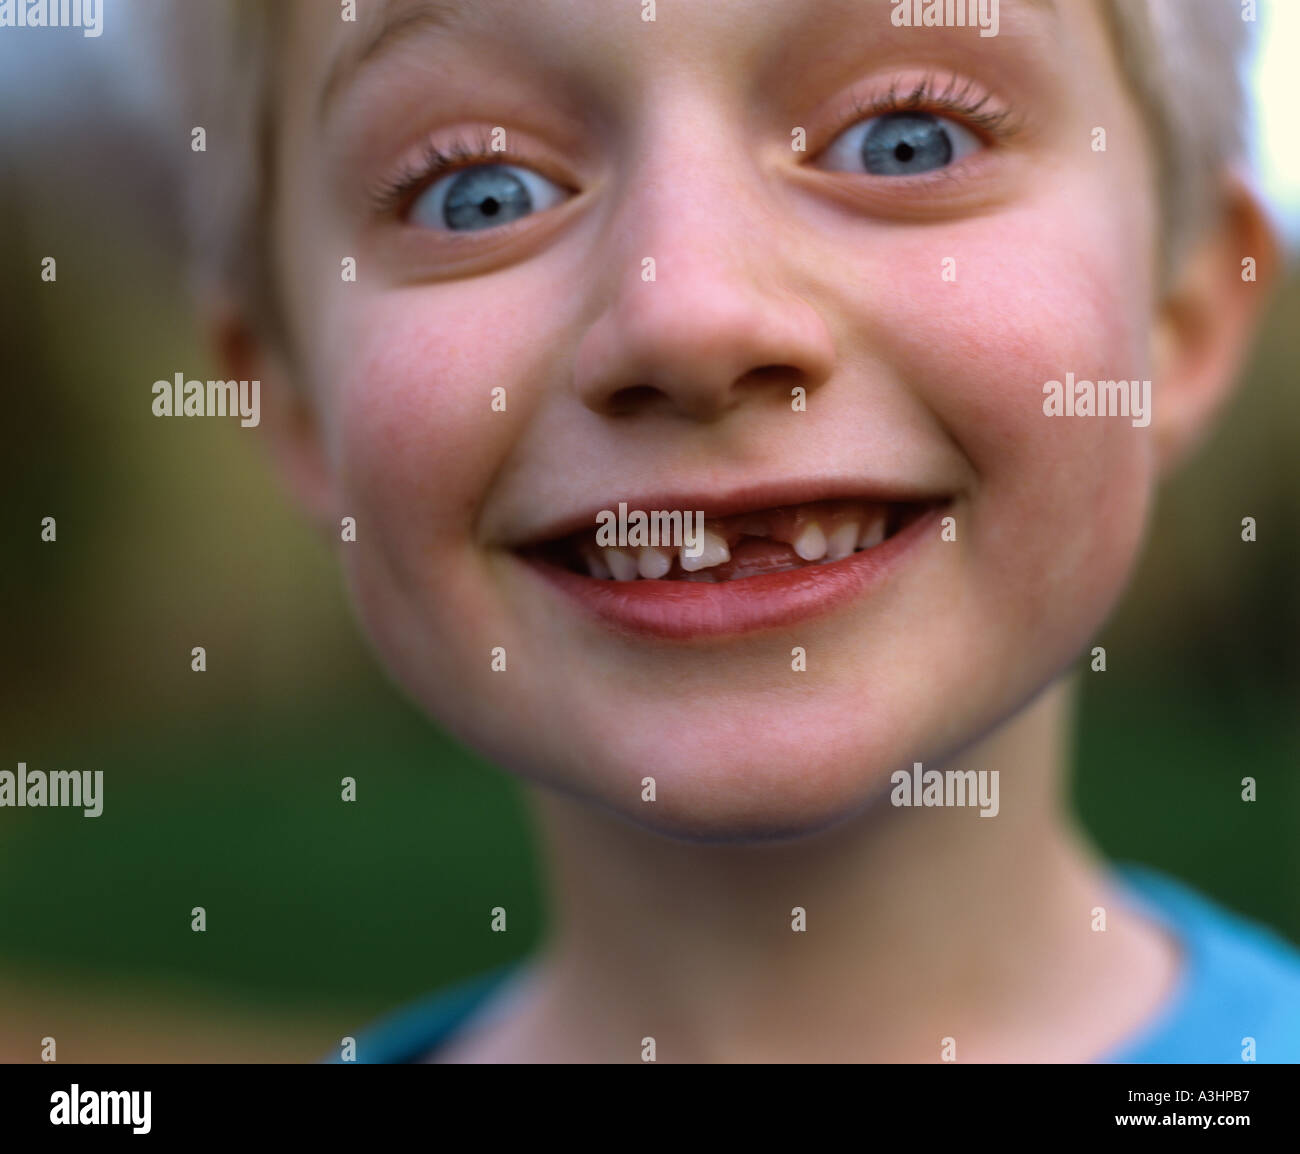 Young boy smiling with tooth missing Stock Photo